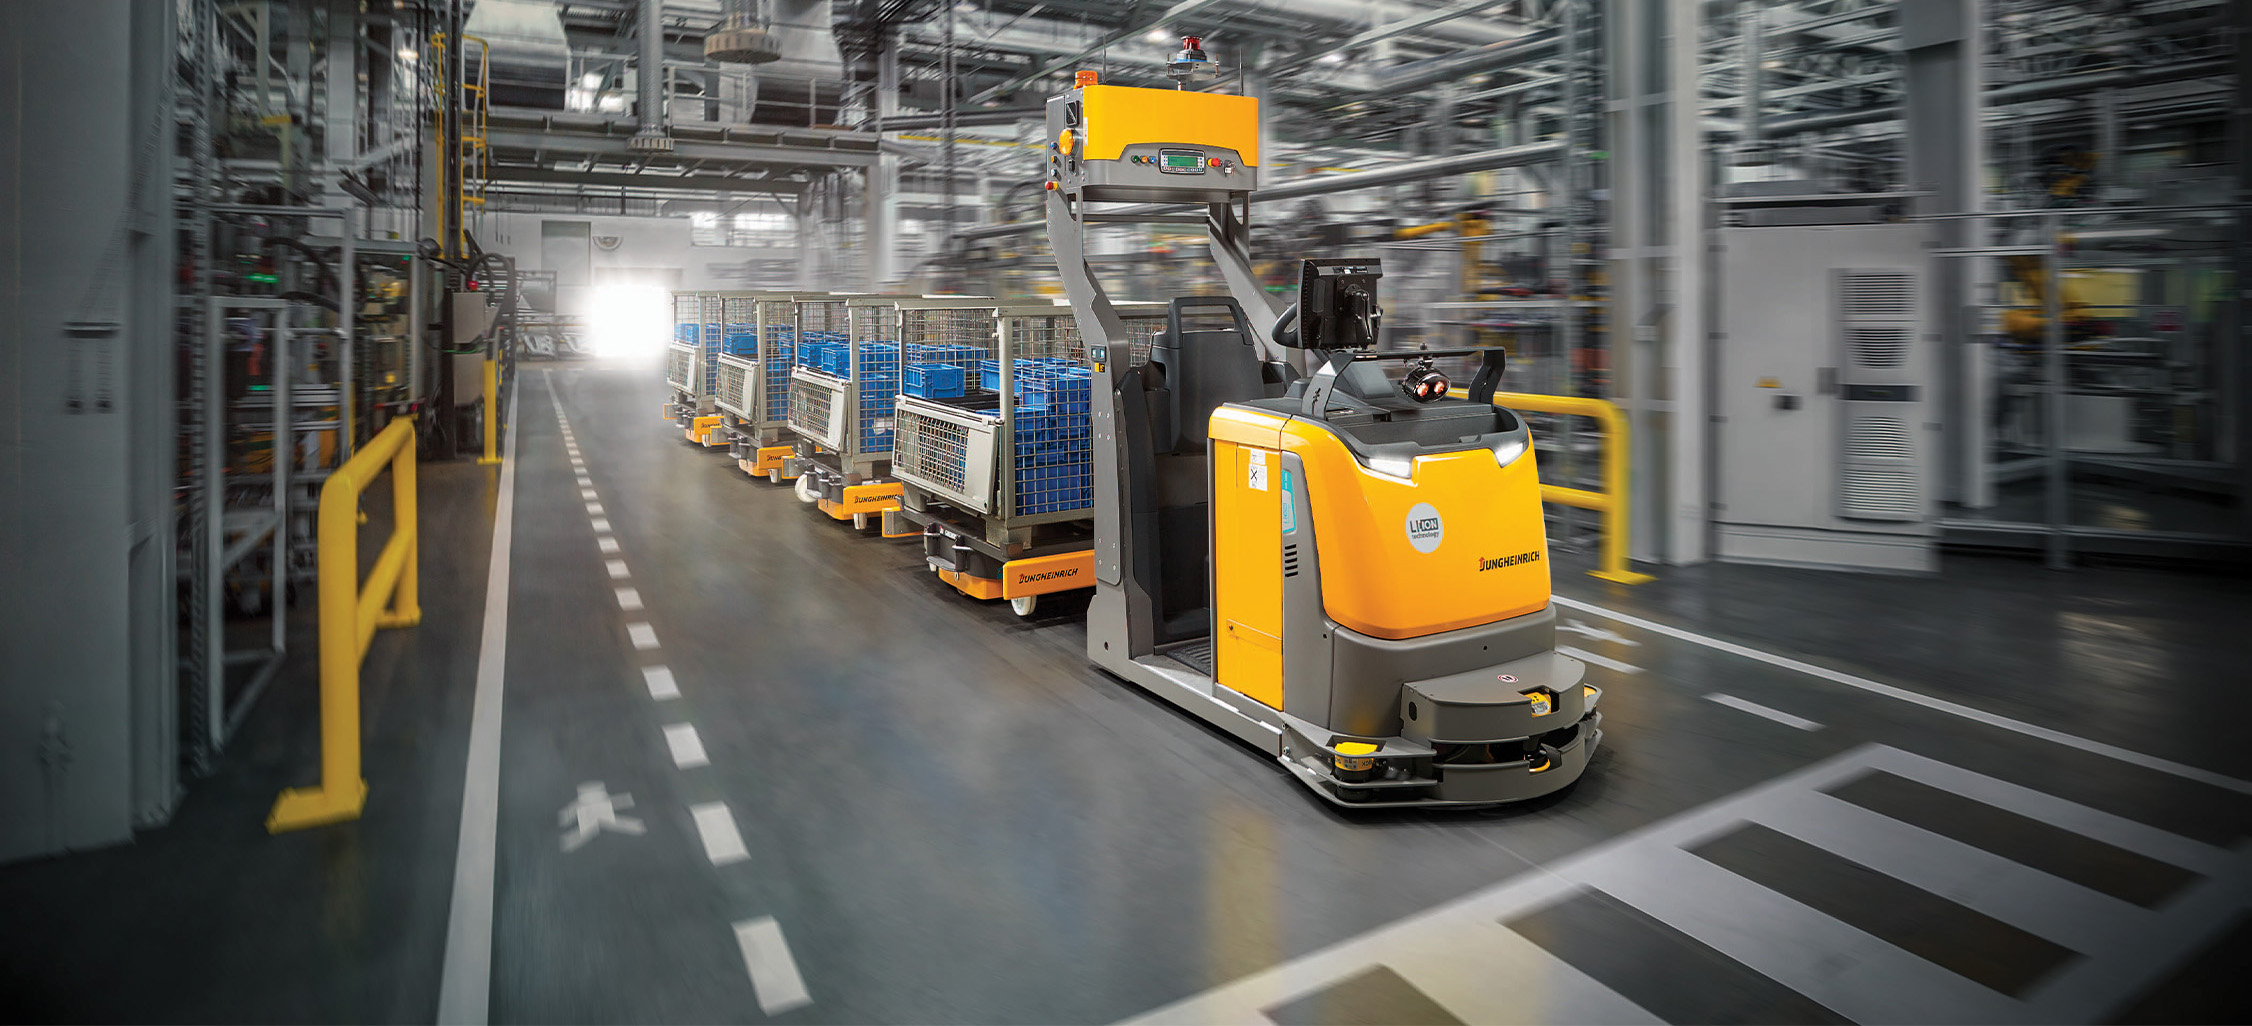 Jungheinrich automated tow tractor in warehouse pulling carts